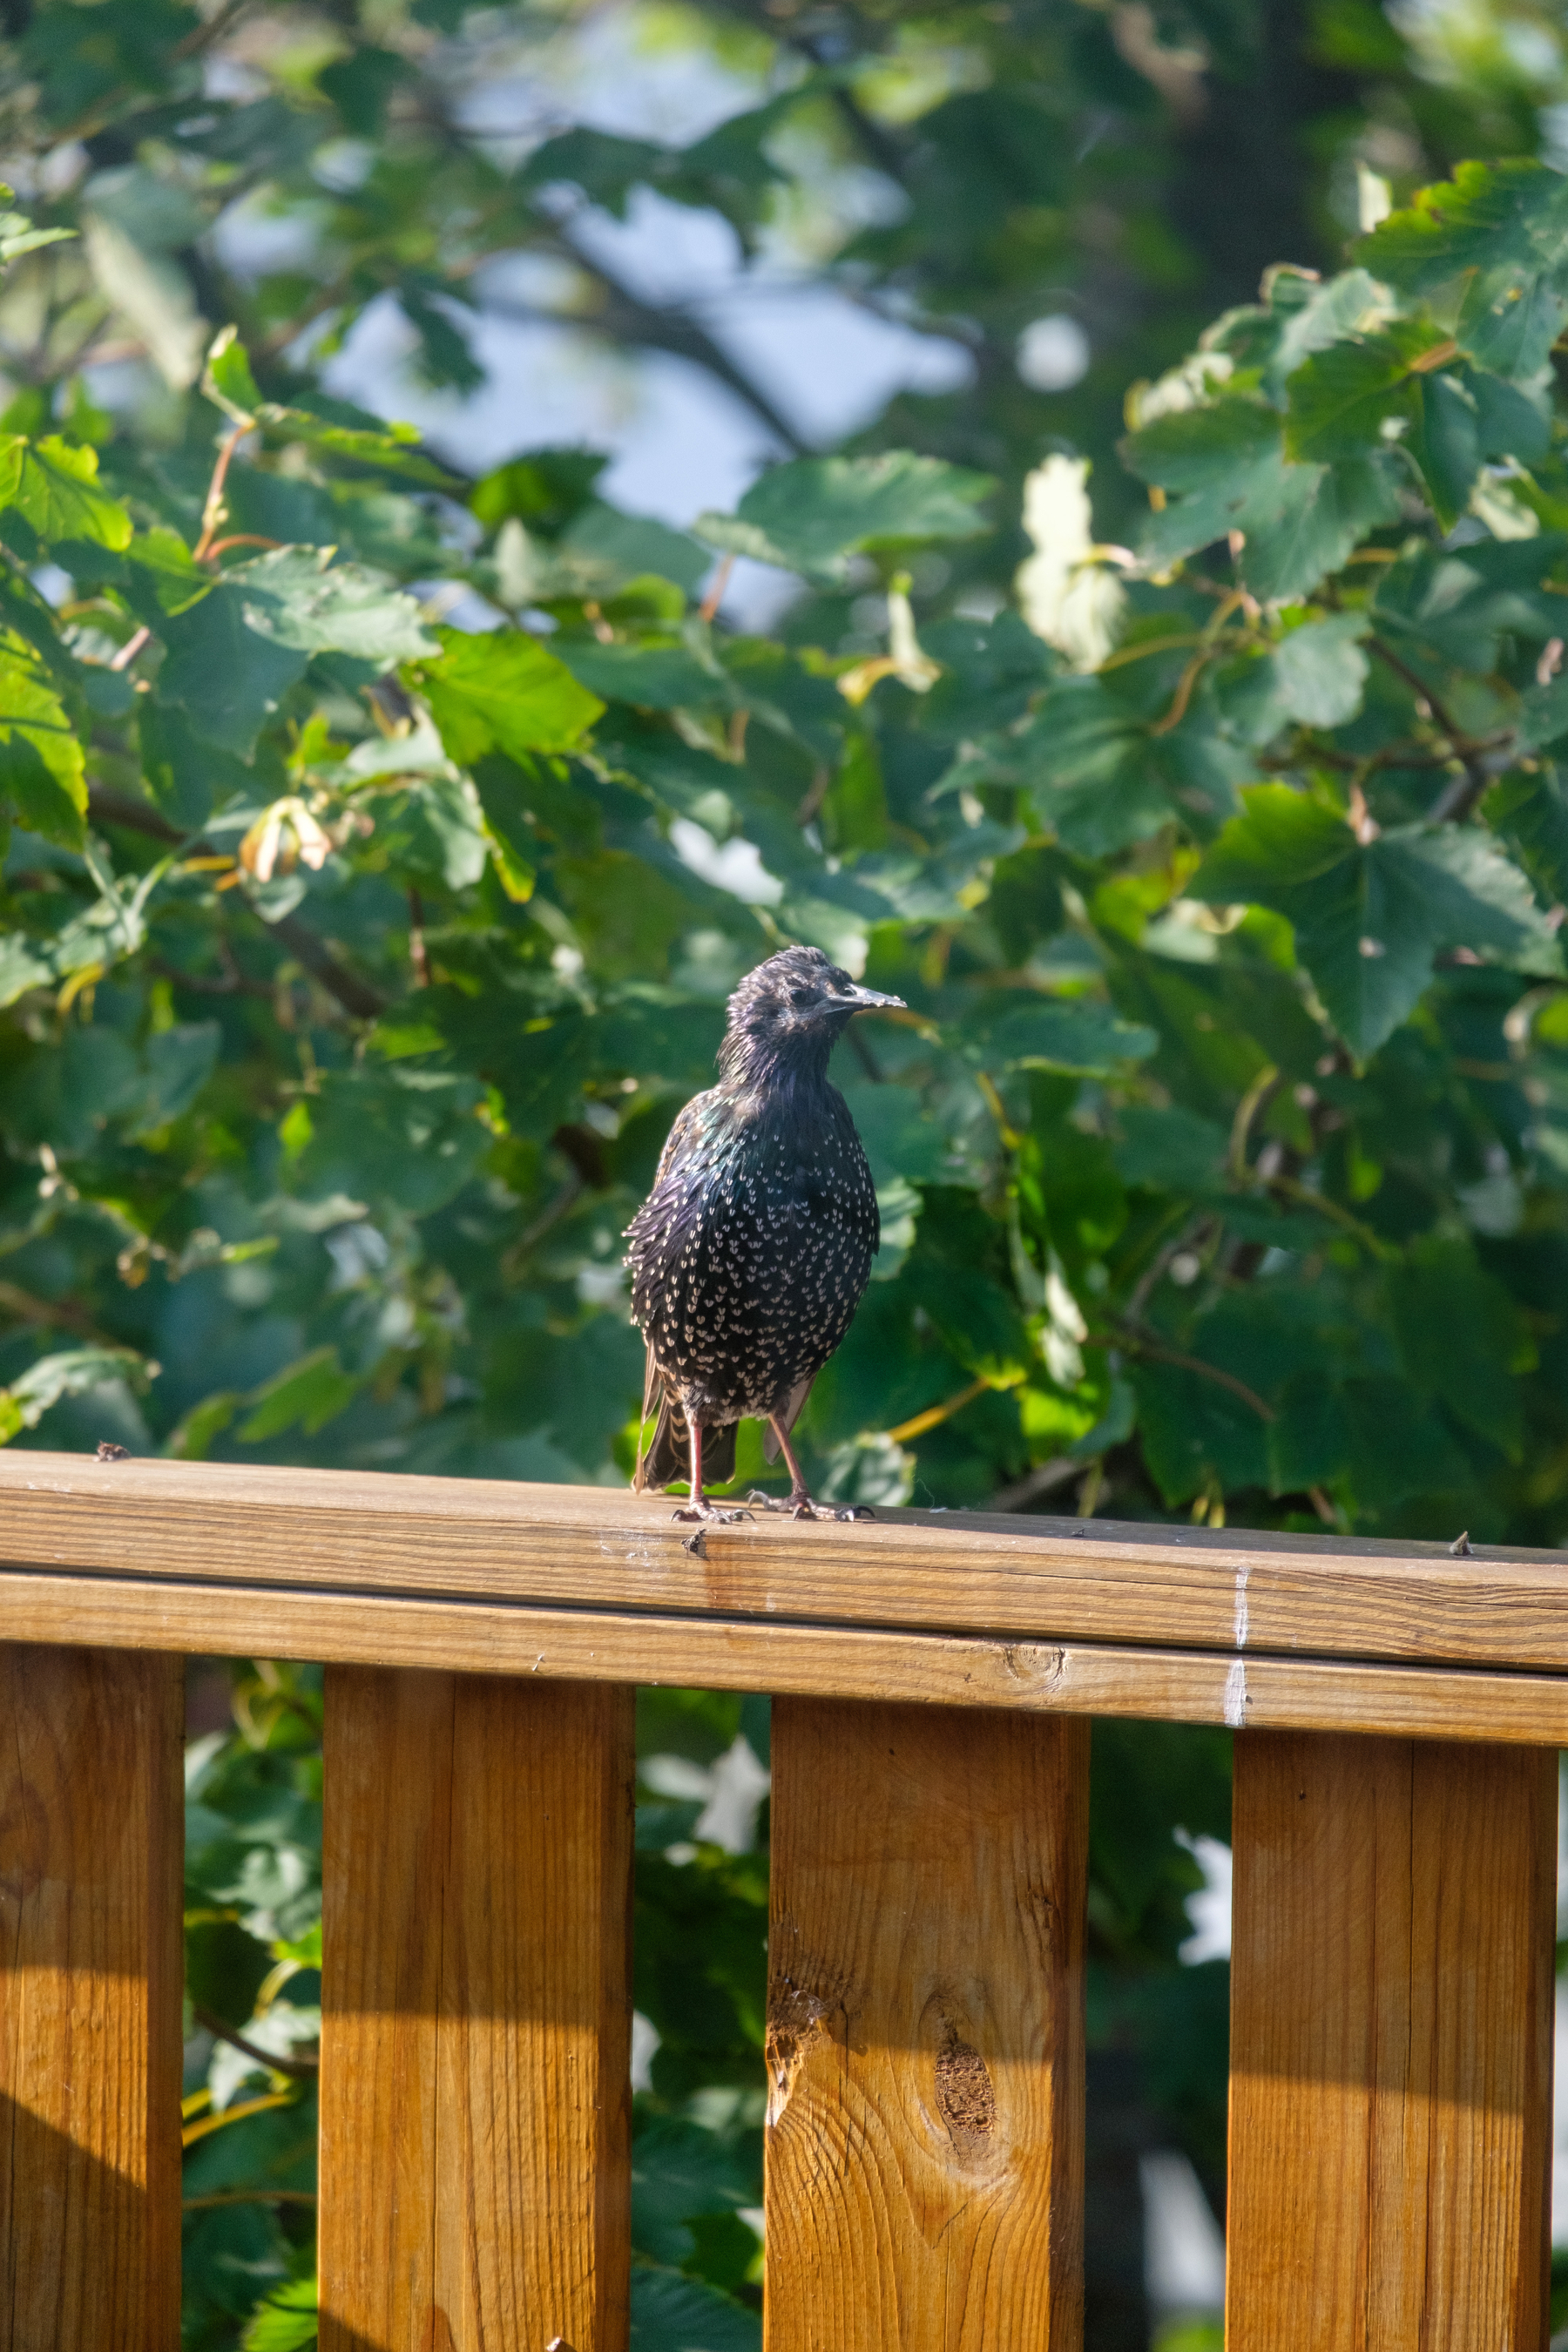 Another starling (or the same one, I can’t tell) carefully inspects the surroundings.